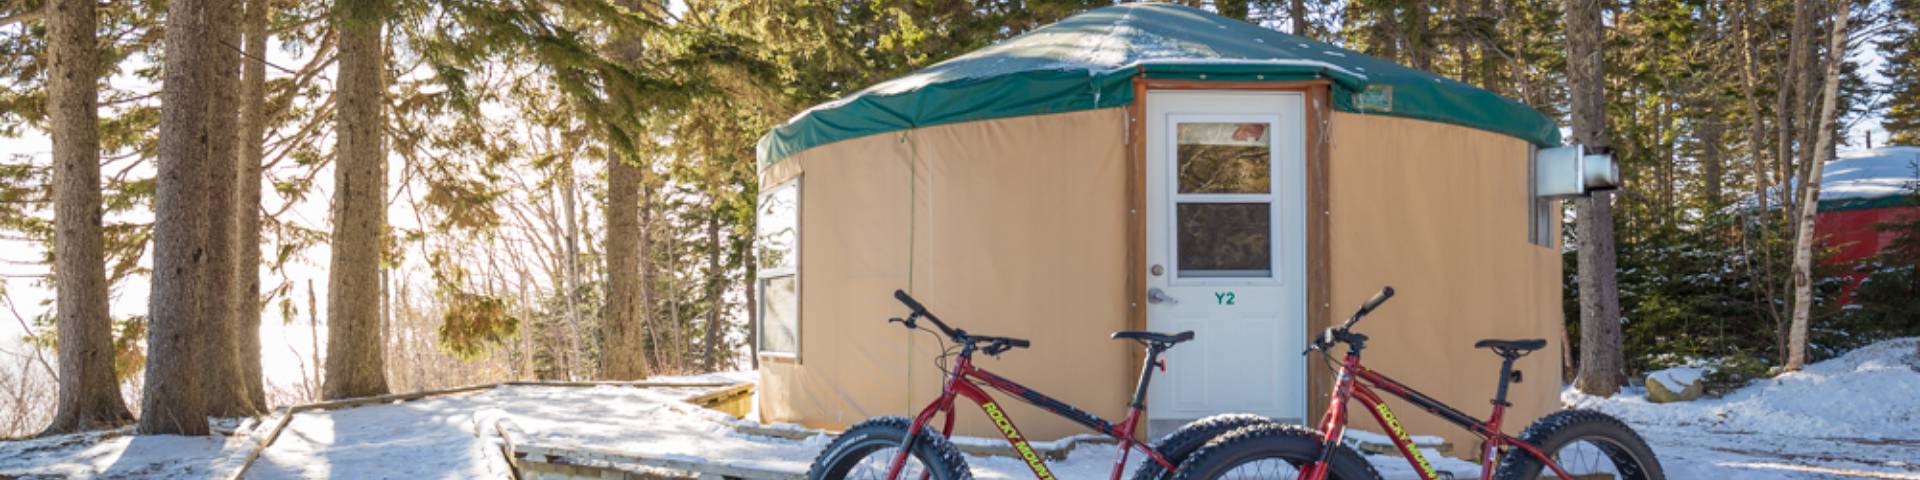 A yurt in the winter